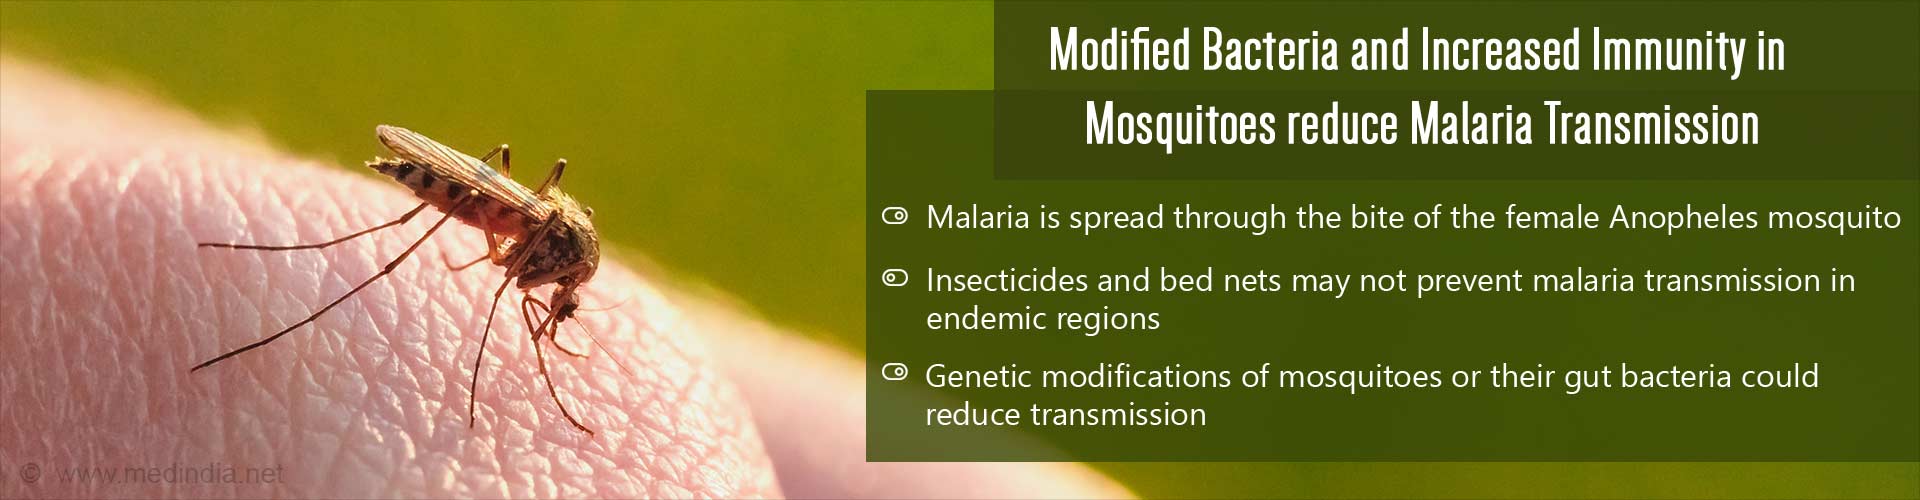 Modified bacteria and increased immunity in mosquitoes reduce malaria transmission
- Malaria is spread through the bite of the female Anopheles mosquito
- Insecticides and bed nets may not prevent malaria transmission in endemic regions
- Genetic modifications of mosquitoes or their gut bacteria could reduce transmission